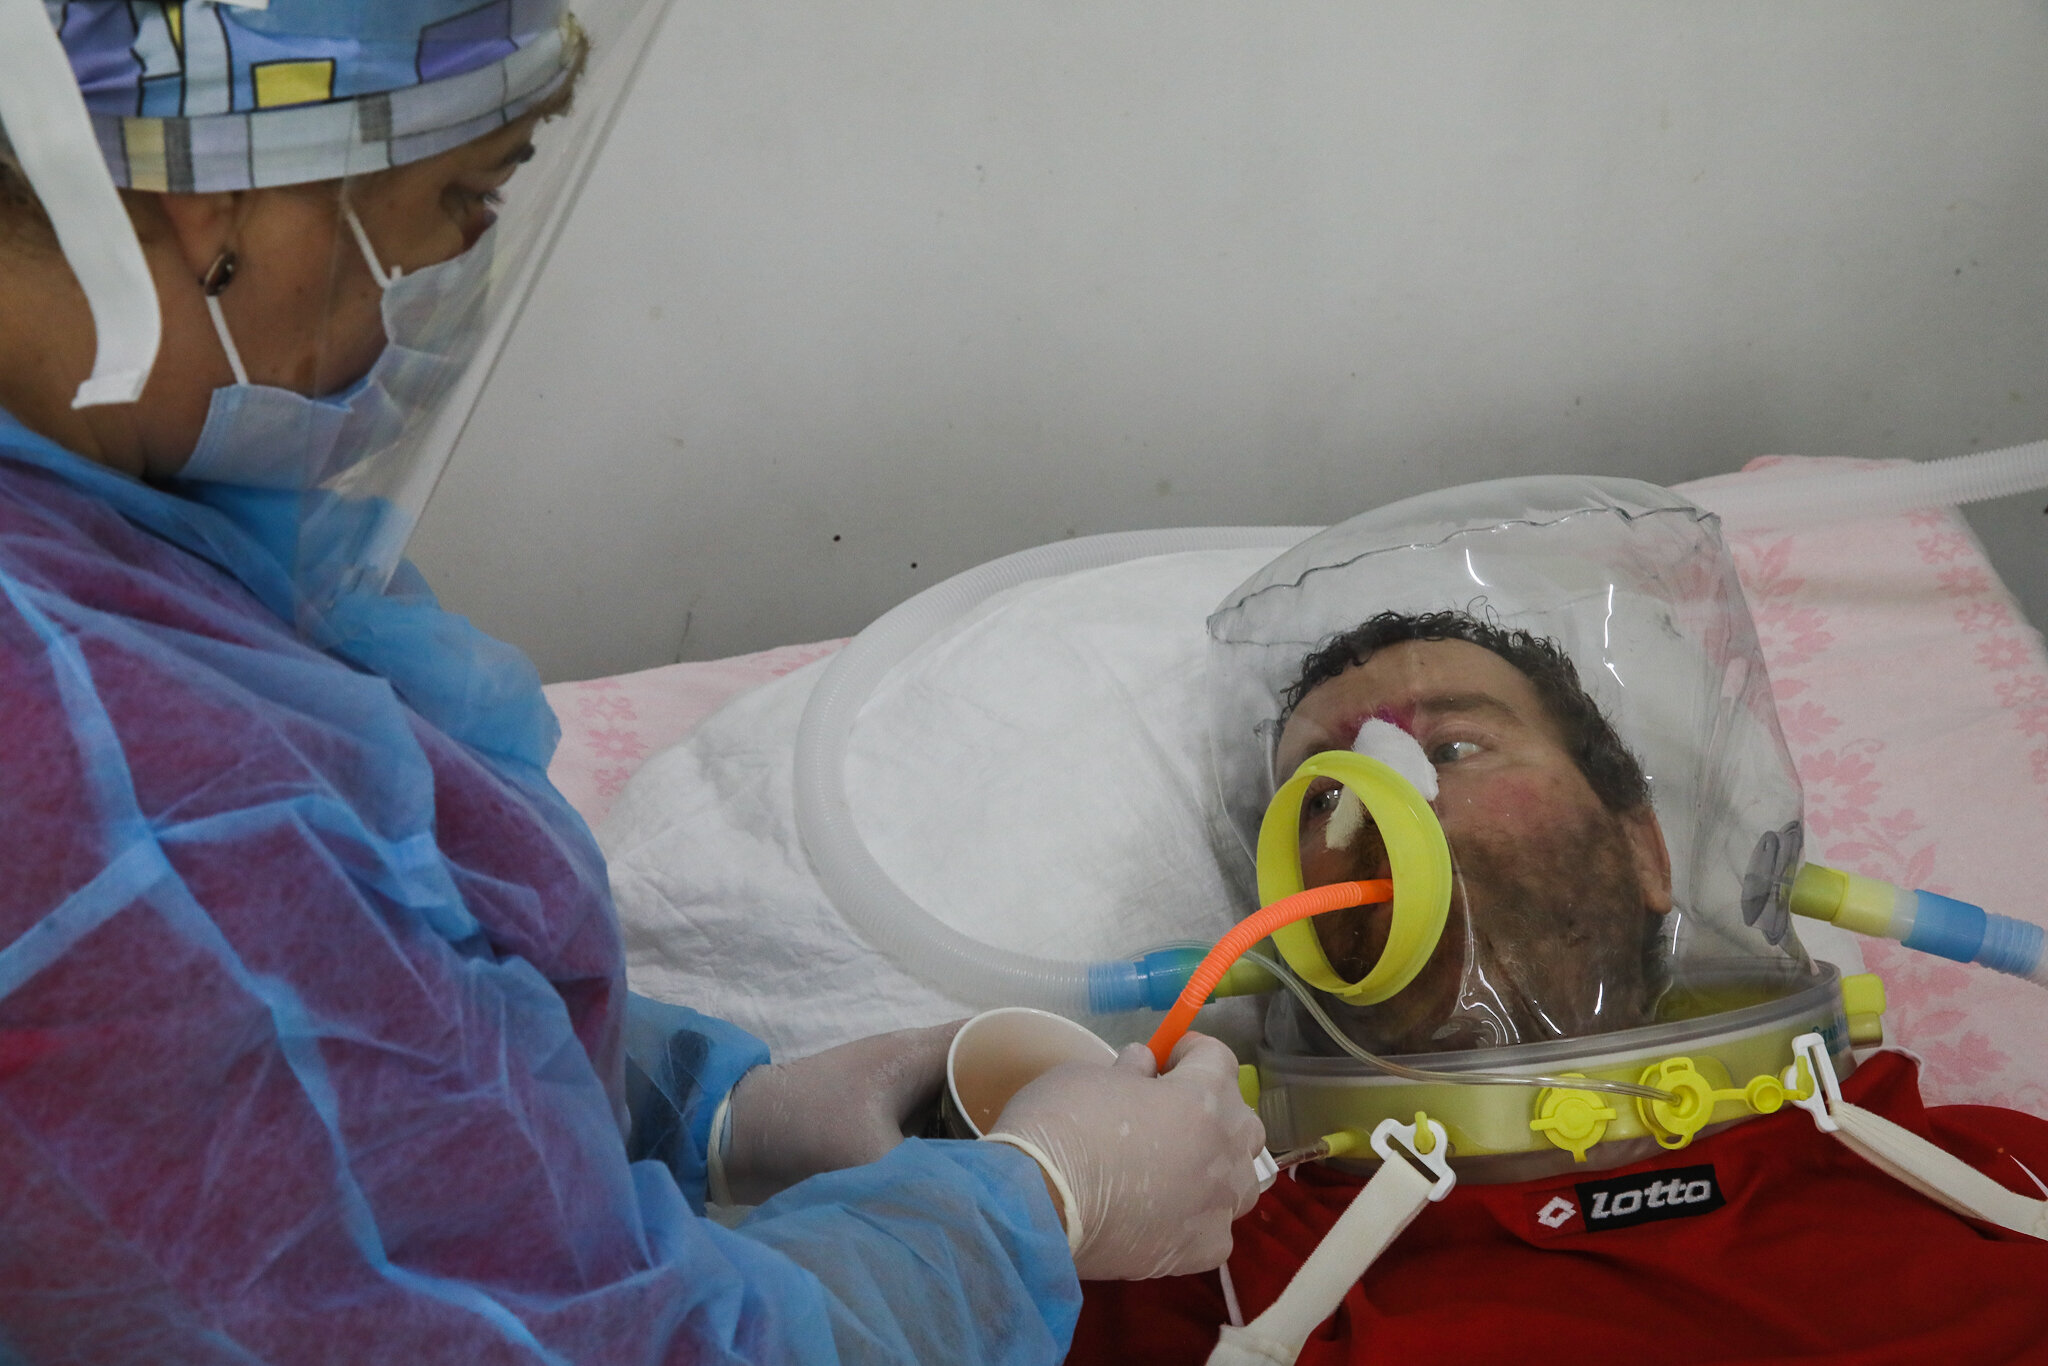 COVID-19 patient Vasyl wears a helmet supplying him with oxygen-enriched air at Kolomyia District Hospital in Ivano-Frankivsk Oblast on March 16, 2021. He used to wear a regular oxygen mask. It had to be replaced with the helmet after his nose began to rot.